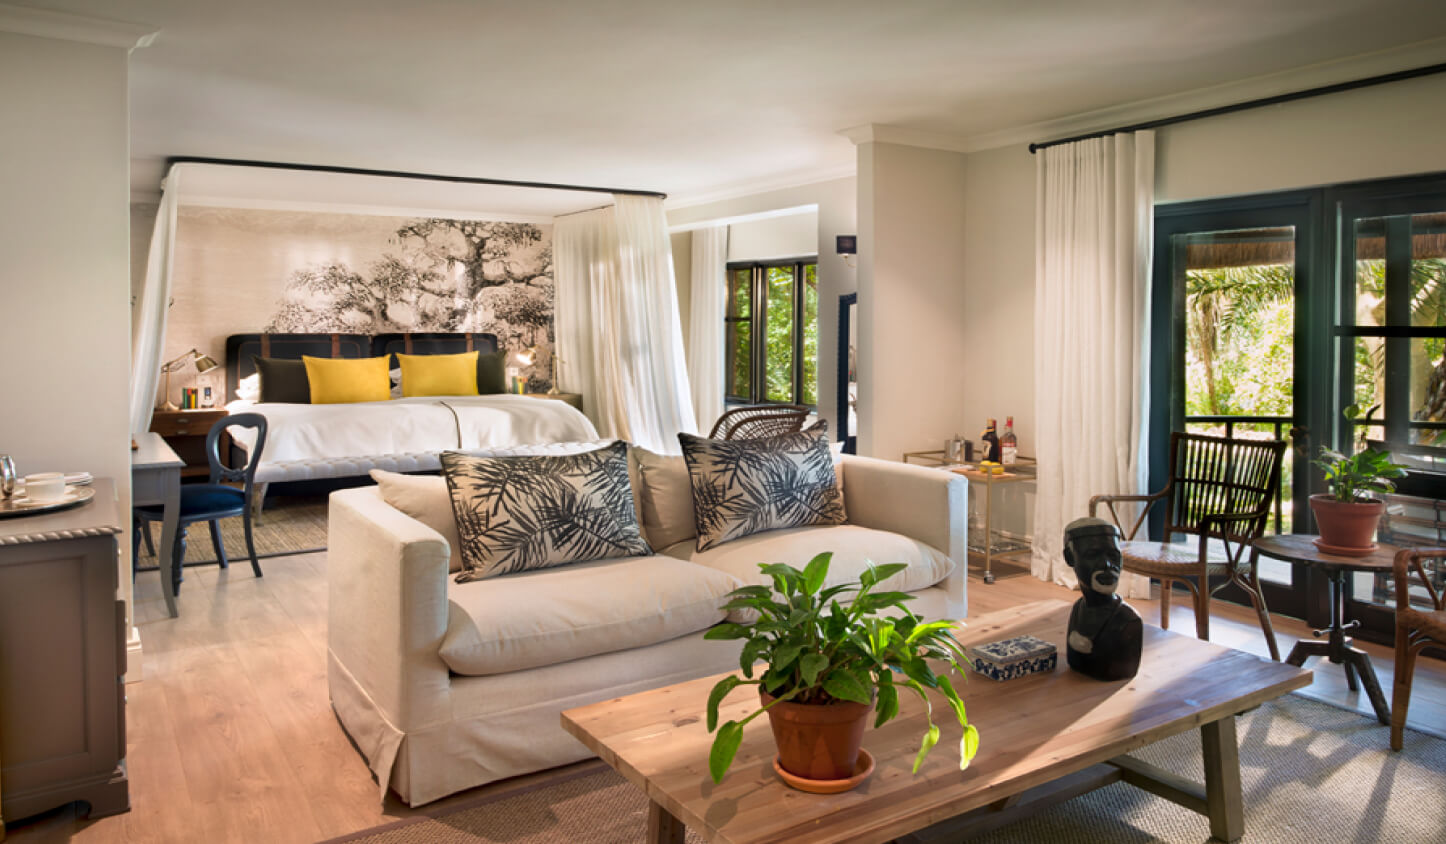 A spacious bedroom with a canopy bed, a seating area with a white couch and coffee table, indoor plants, and large windows with curtains, offering a view outside at lion sands perfect for a safari